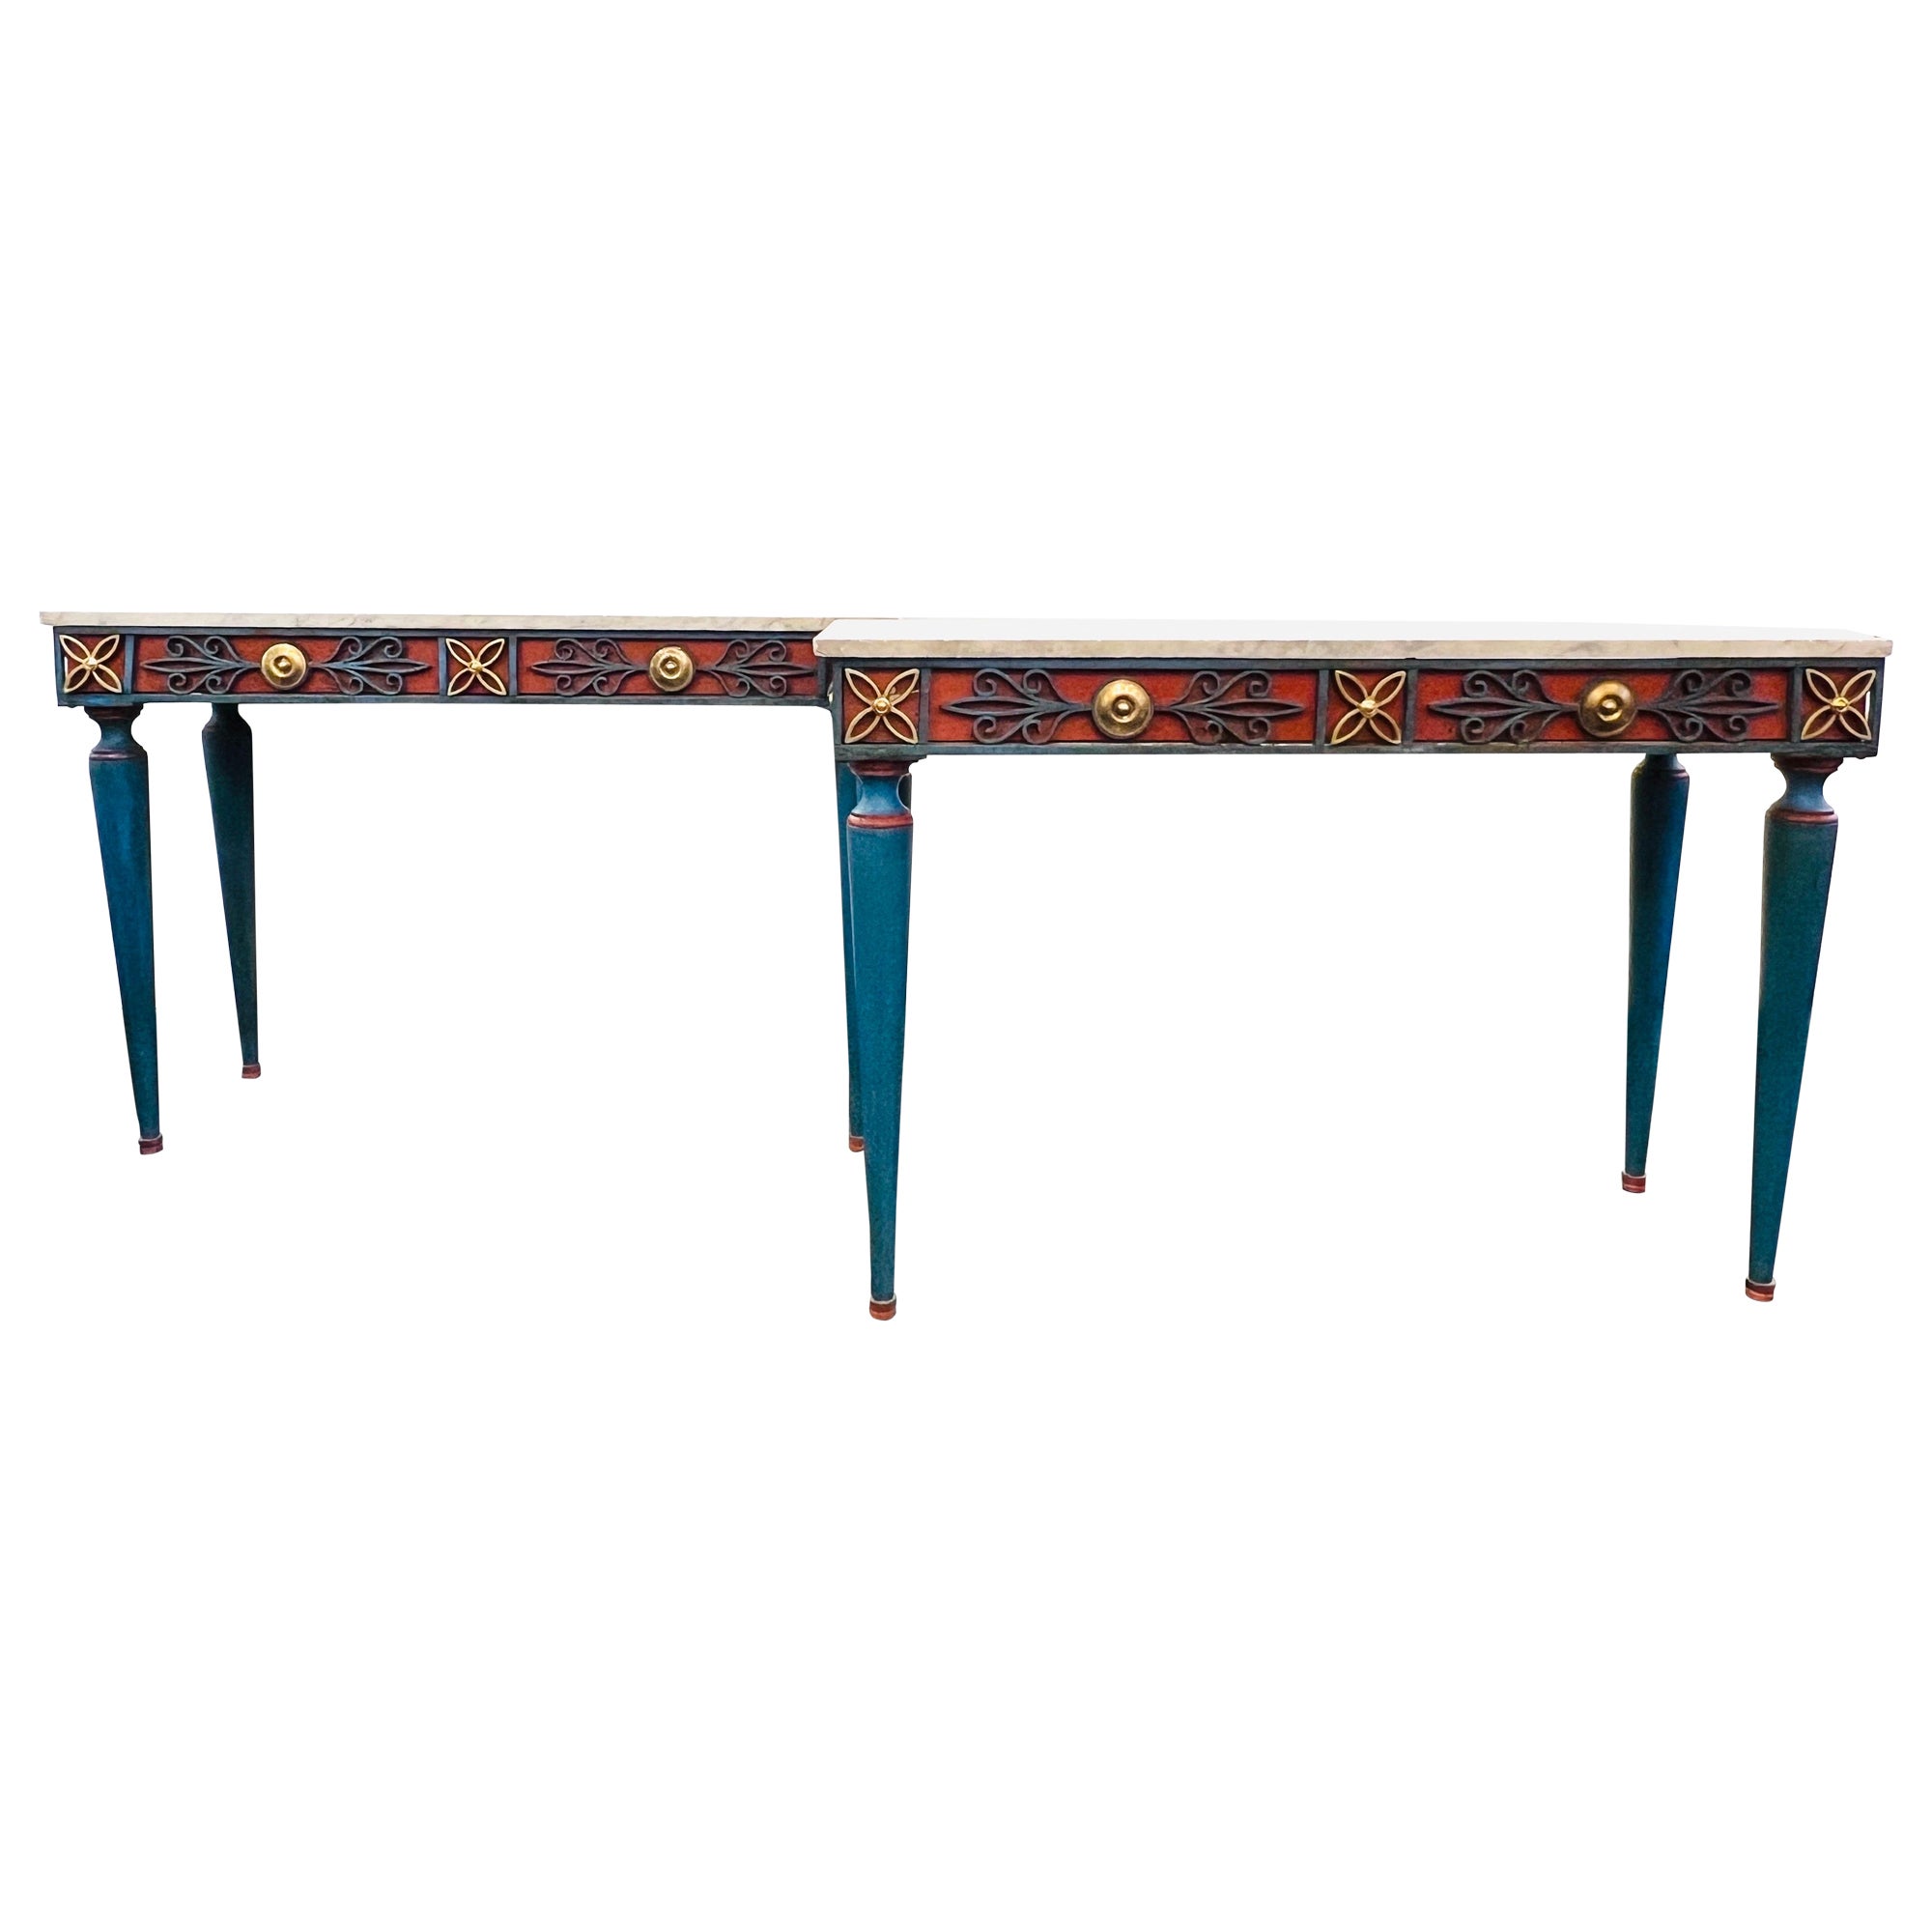 Pair italian painted wrought iron console tables with marble tops C1900